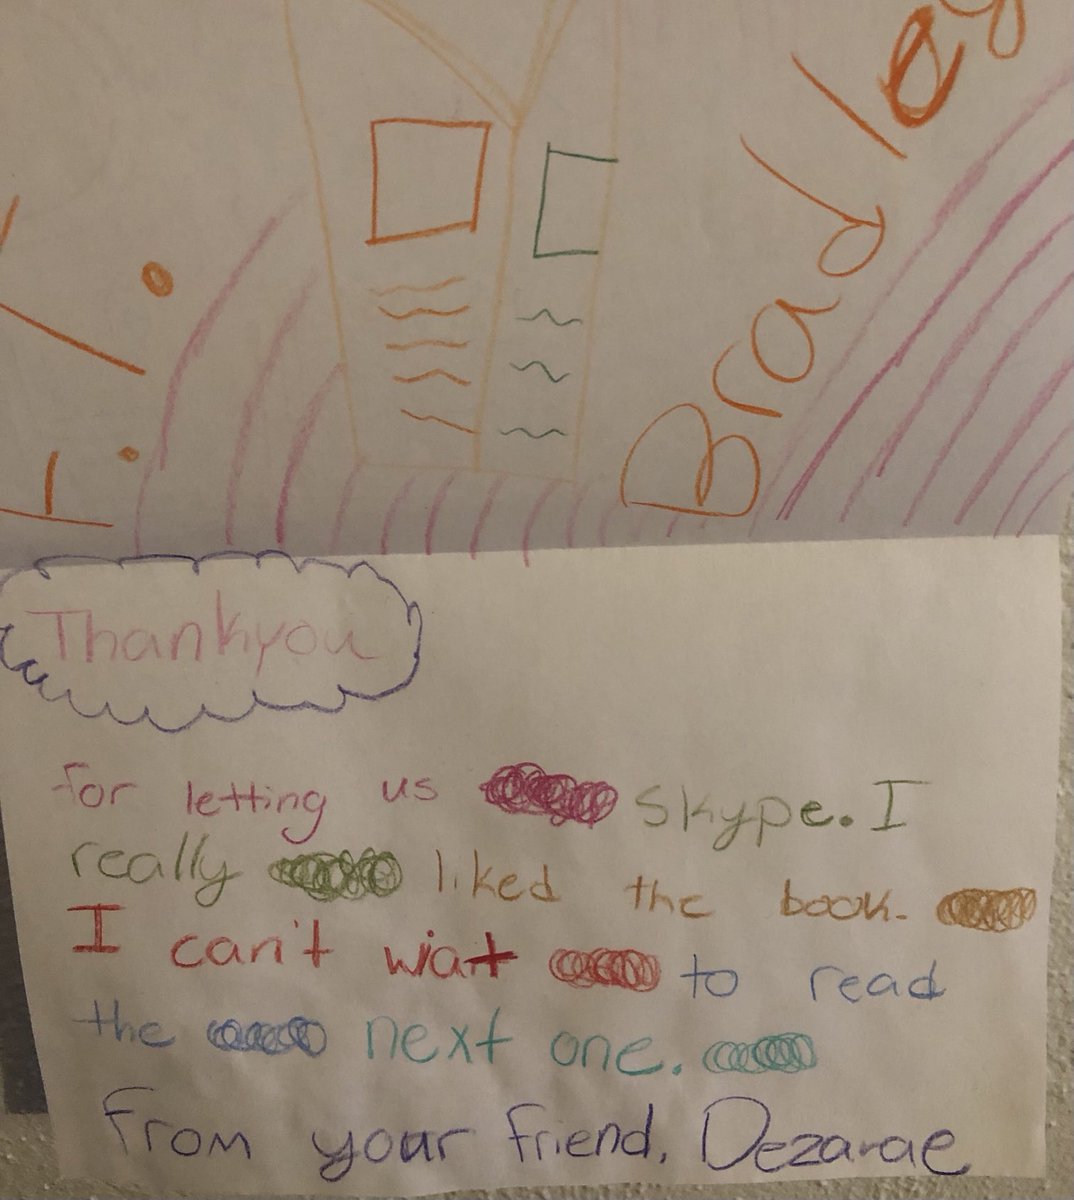 Today's kid fanmail motivation comes from Dezarae, who read my Double Vision book and drew me a book 😊 Perfect motivation this Wednesday... #mglit #mystery #amwriting #wednesdaymorivation #authorlife